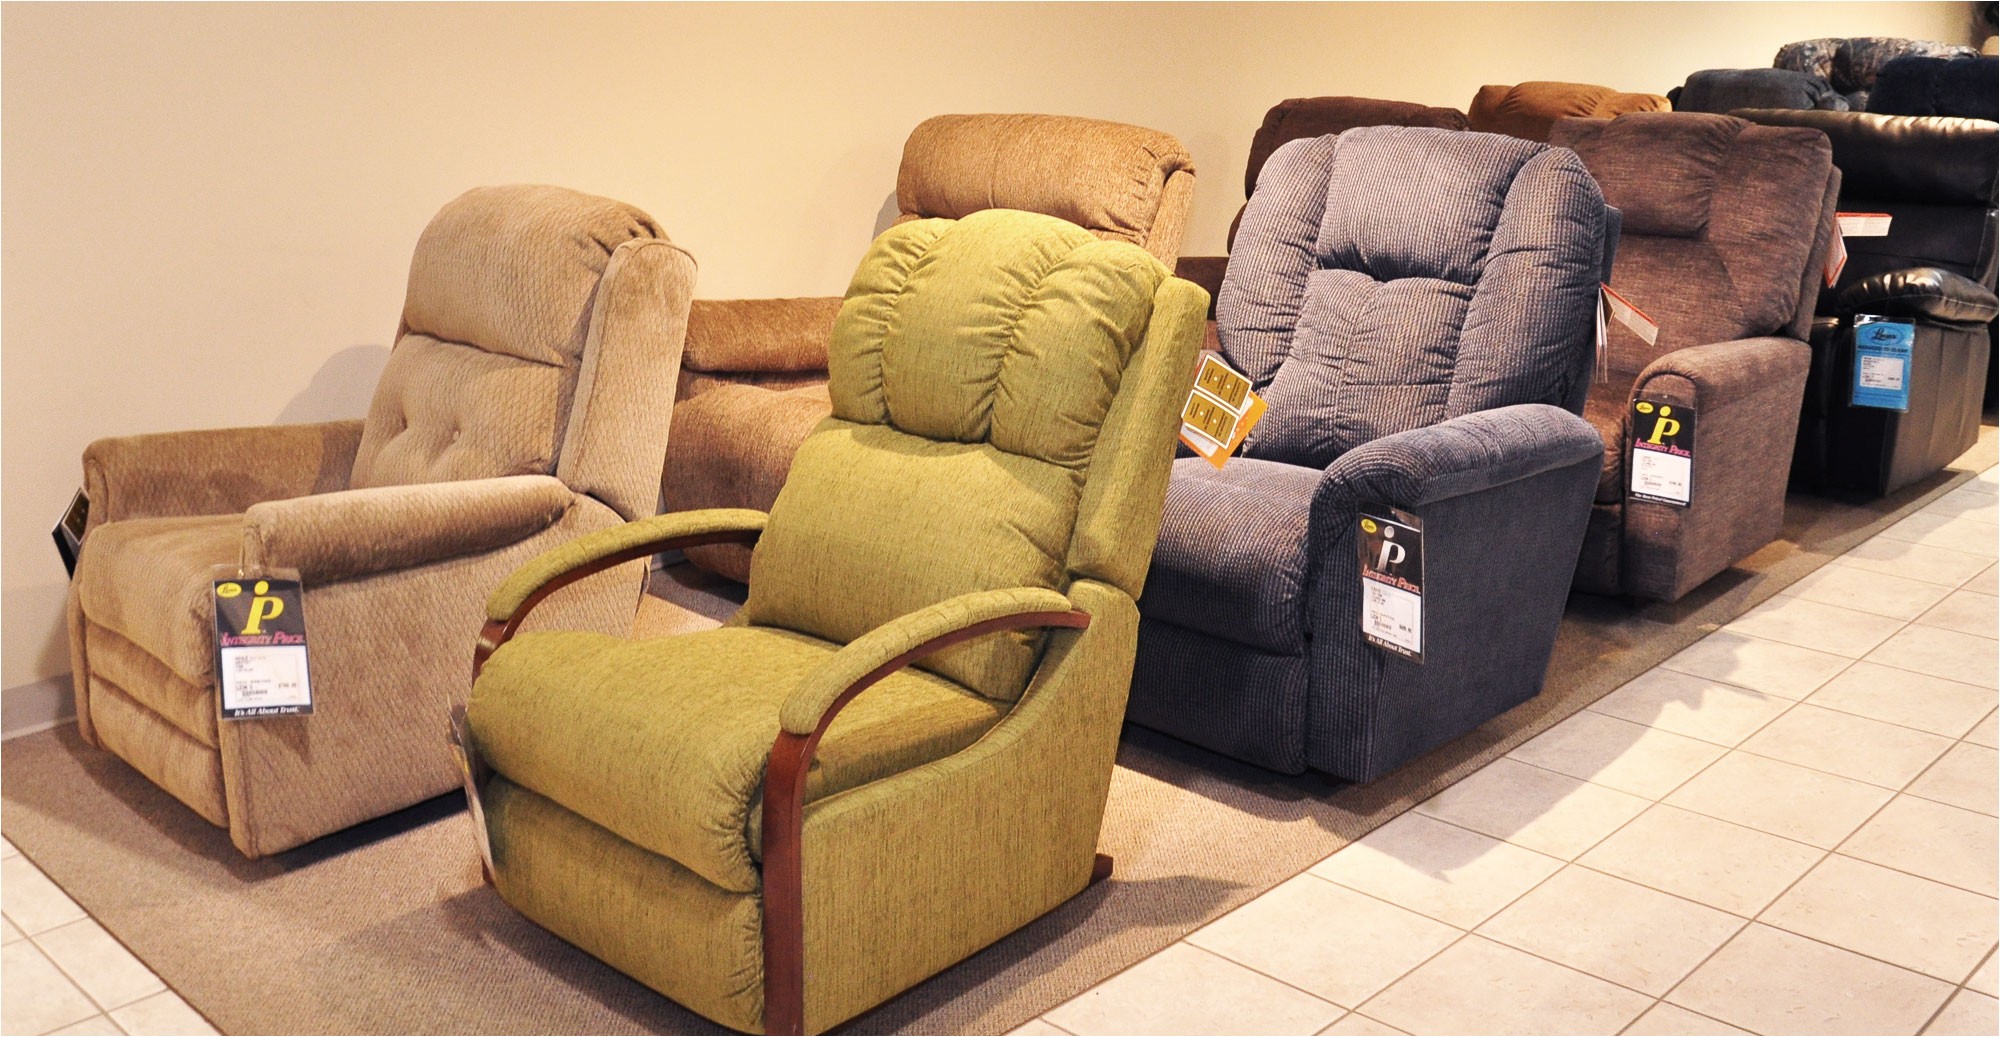 leon s furniture in bracebridge and huntsville strive to provide an excellent selection assortment of la z boy furniture from their classic recliners to